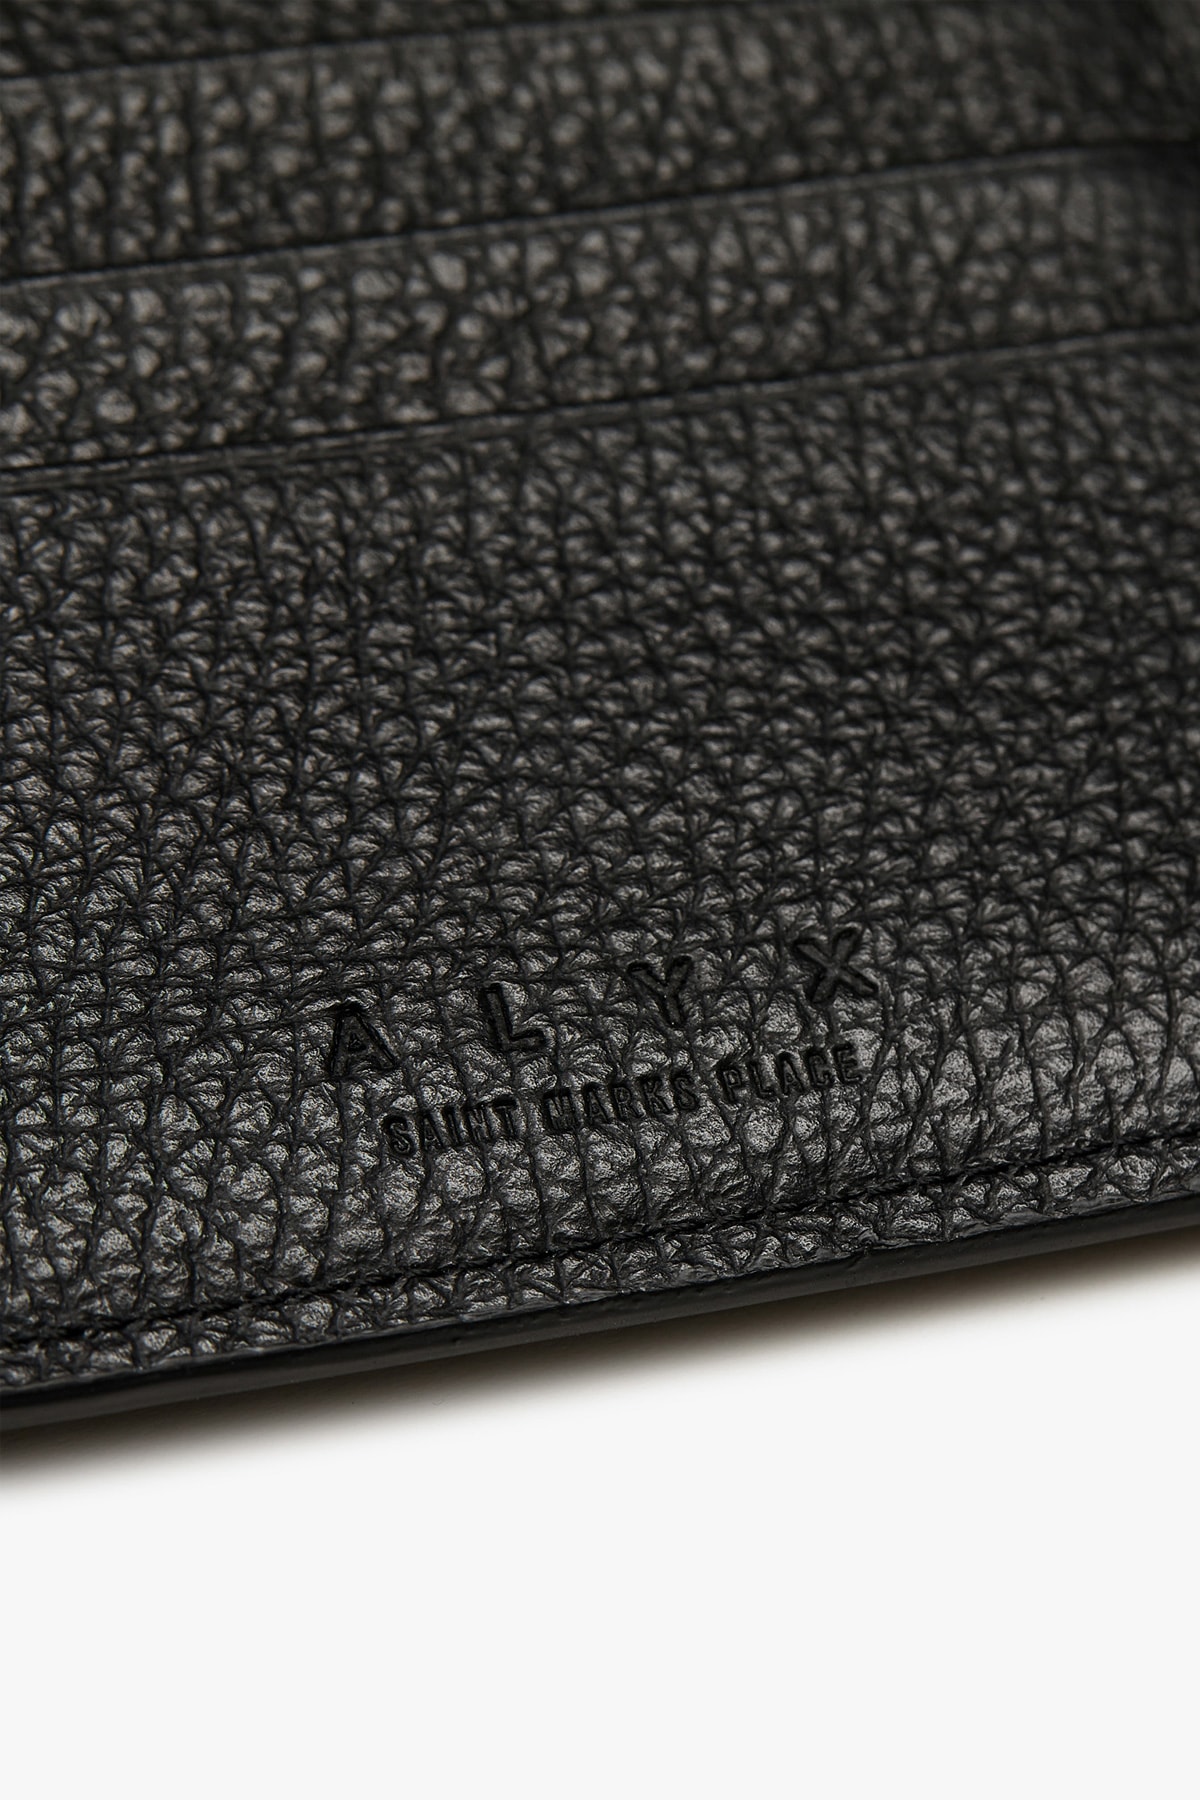 ALYX Leather Goods Wallet Collection Black